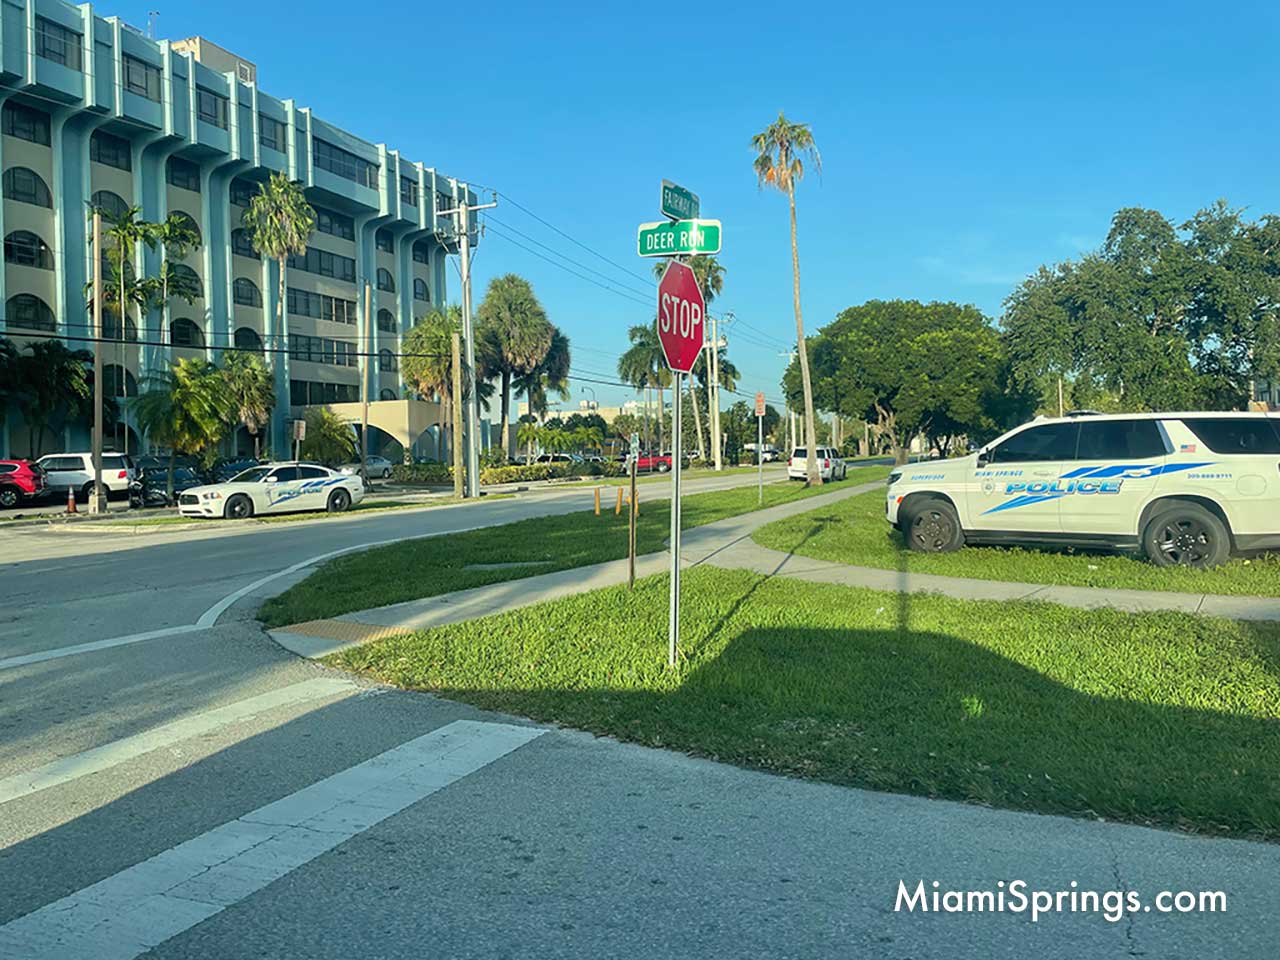 Miami Springs Police Respond to call from 36 Street Hotel